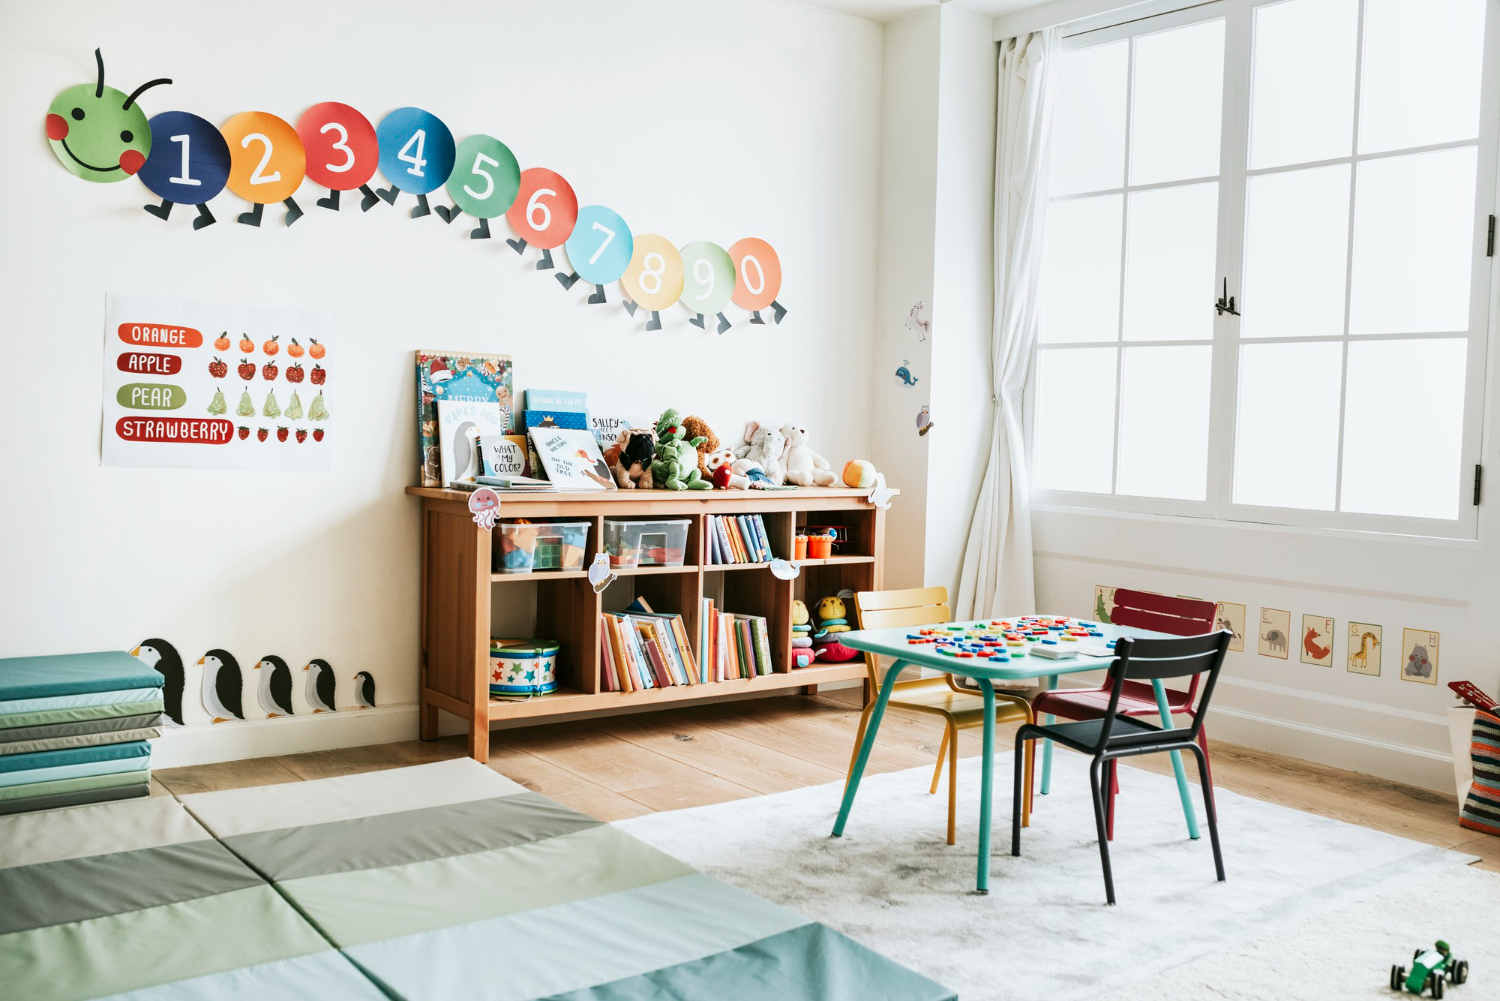 Growing Up in Style: Kids Room Design Ideas